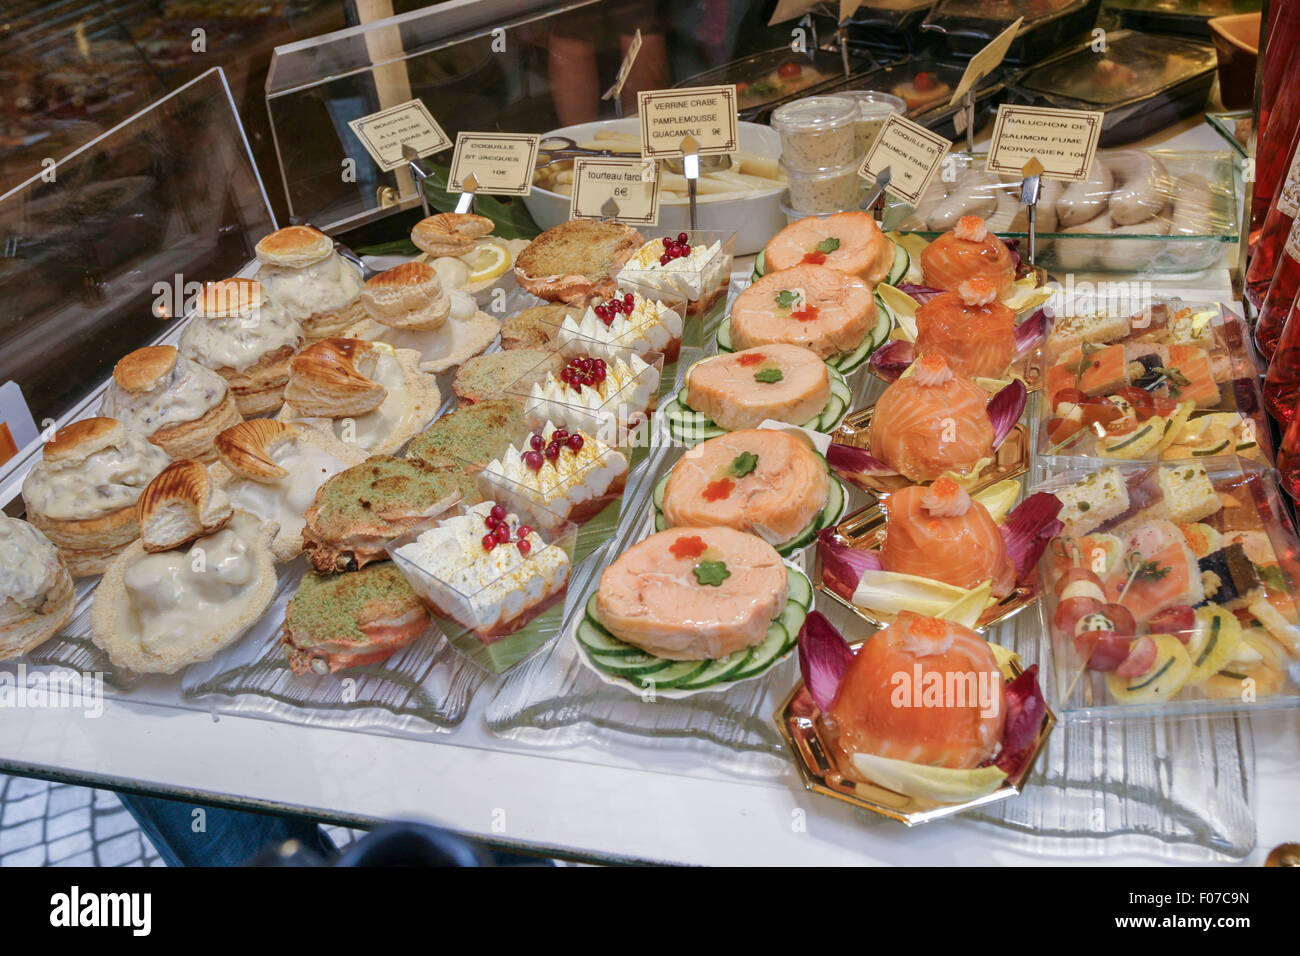 SEAFOOD DELICACIES ON DISPLAY, RUE MONTORGUEIL, PARIS FRANCE - CIRCA 2009.  Salmon, crab, and duck delicacies are displayed in a Stock Photo